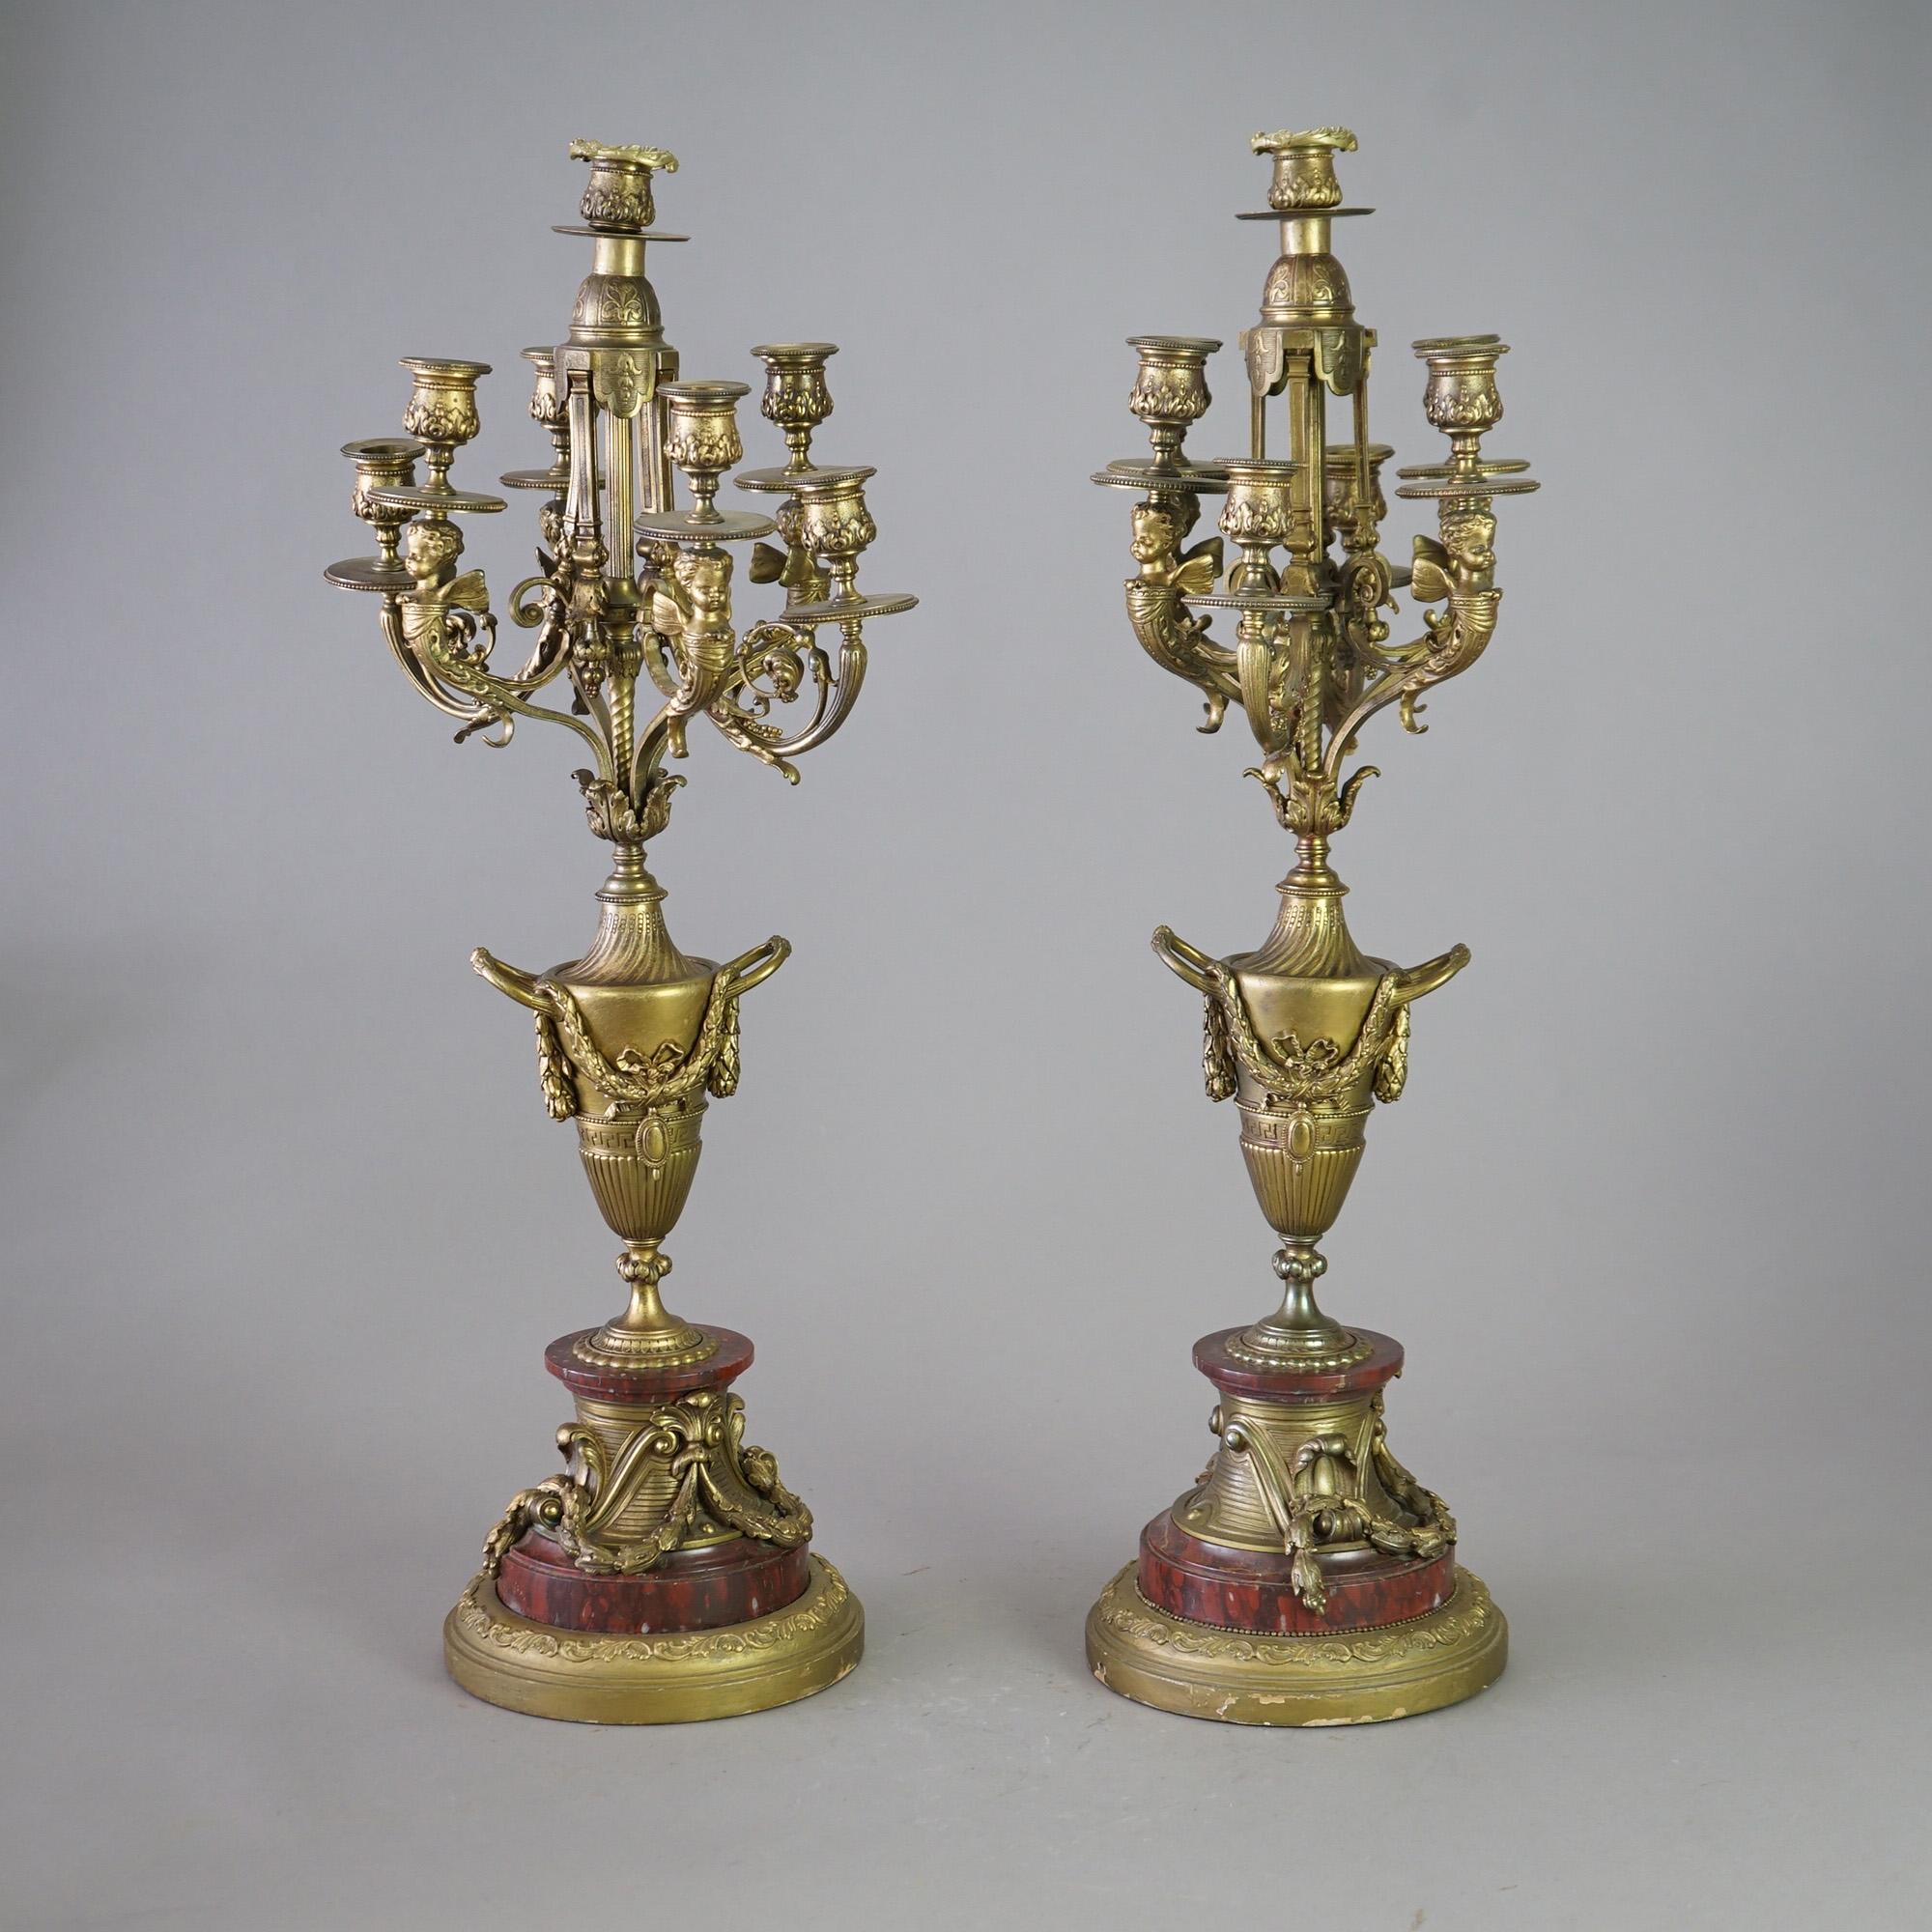 Cast Antique Pair of French Empire Gilt Bronze & Rouge Marble Candelabra 19thC For Sale